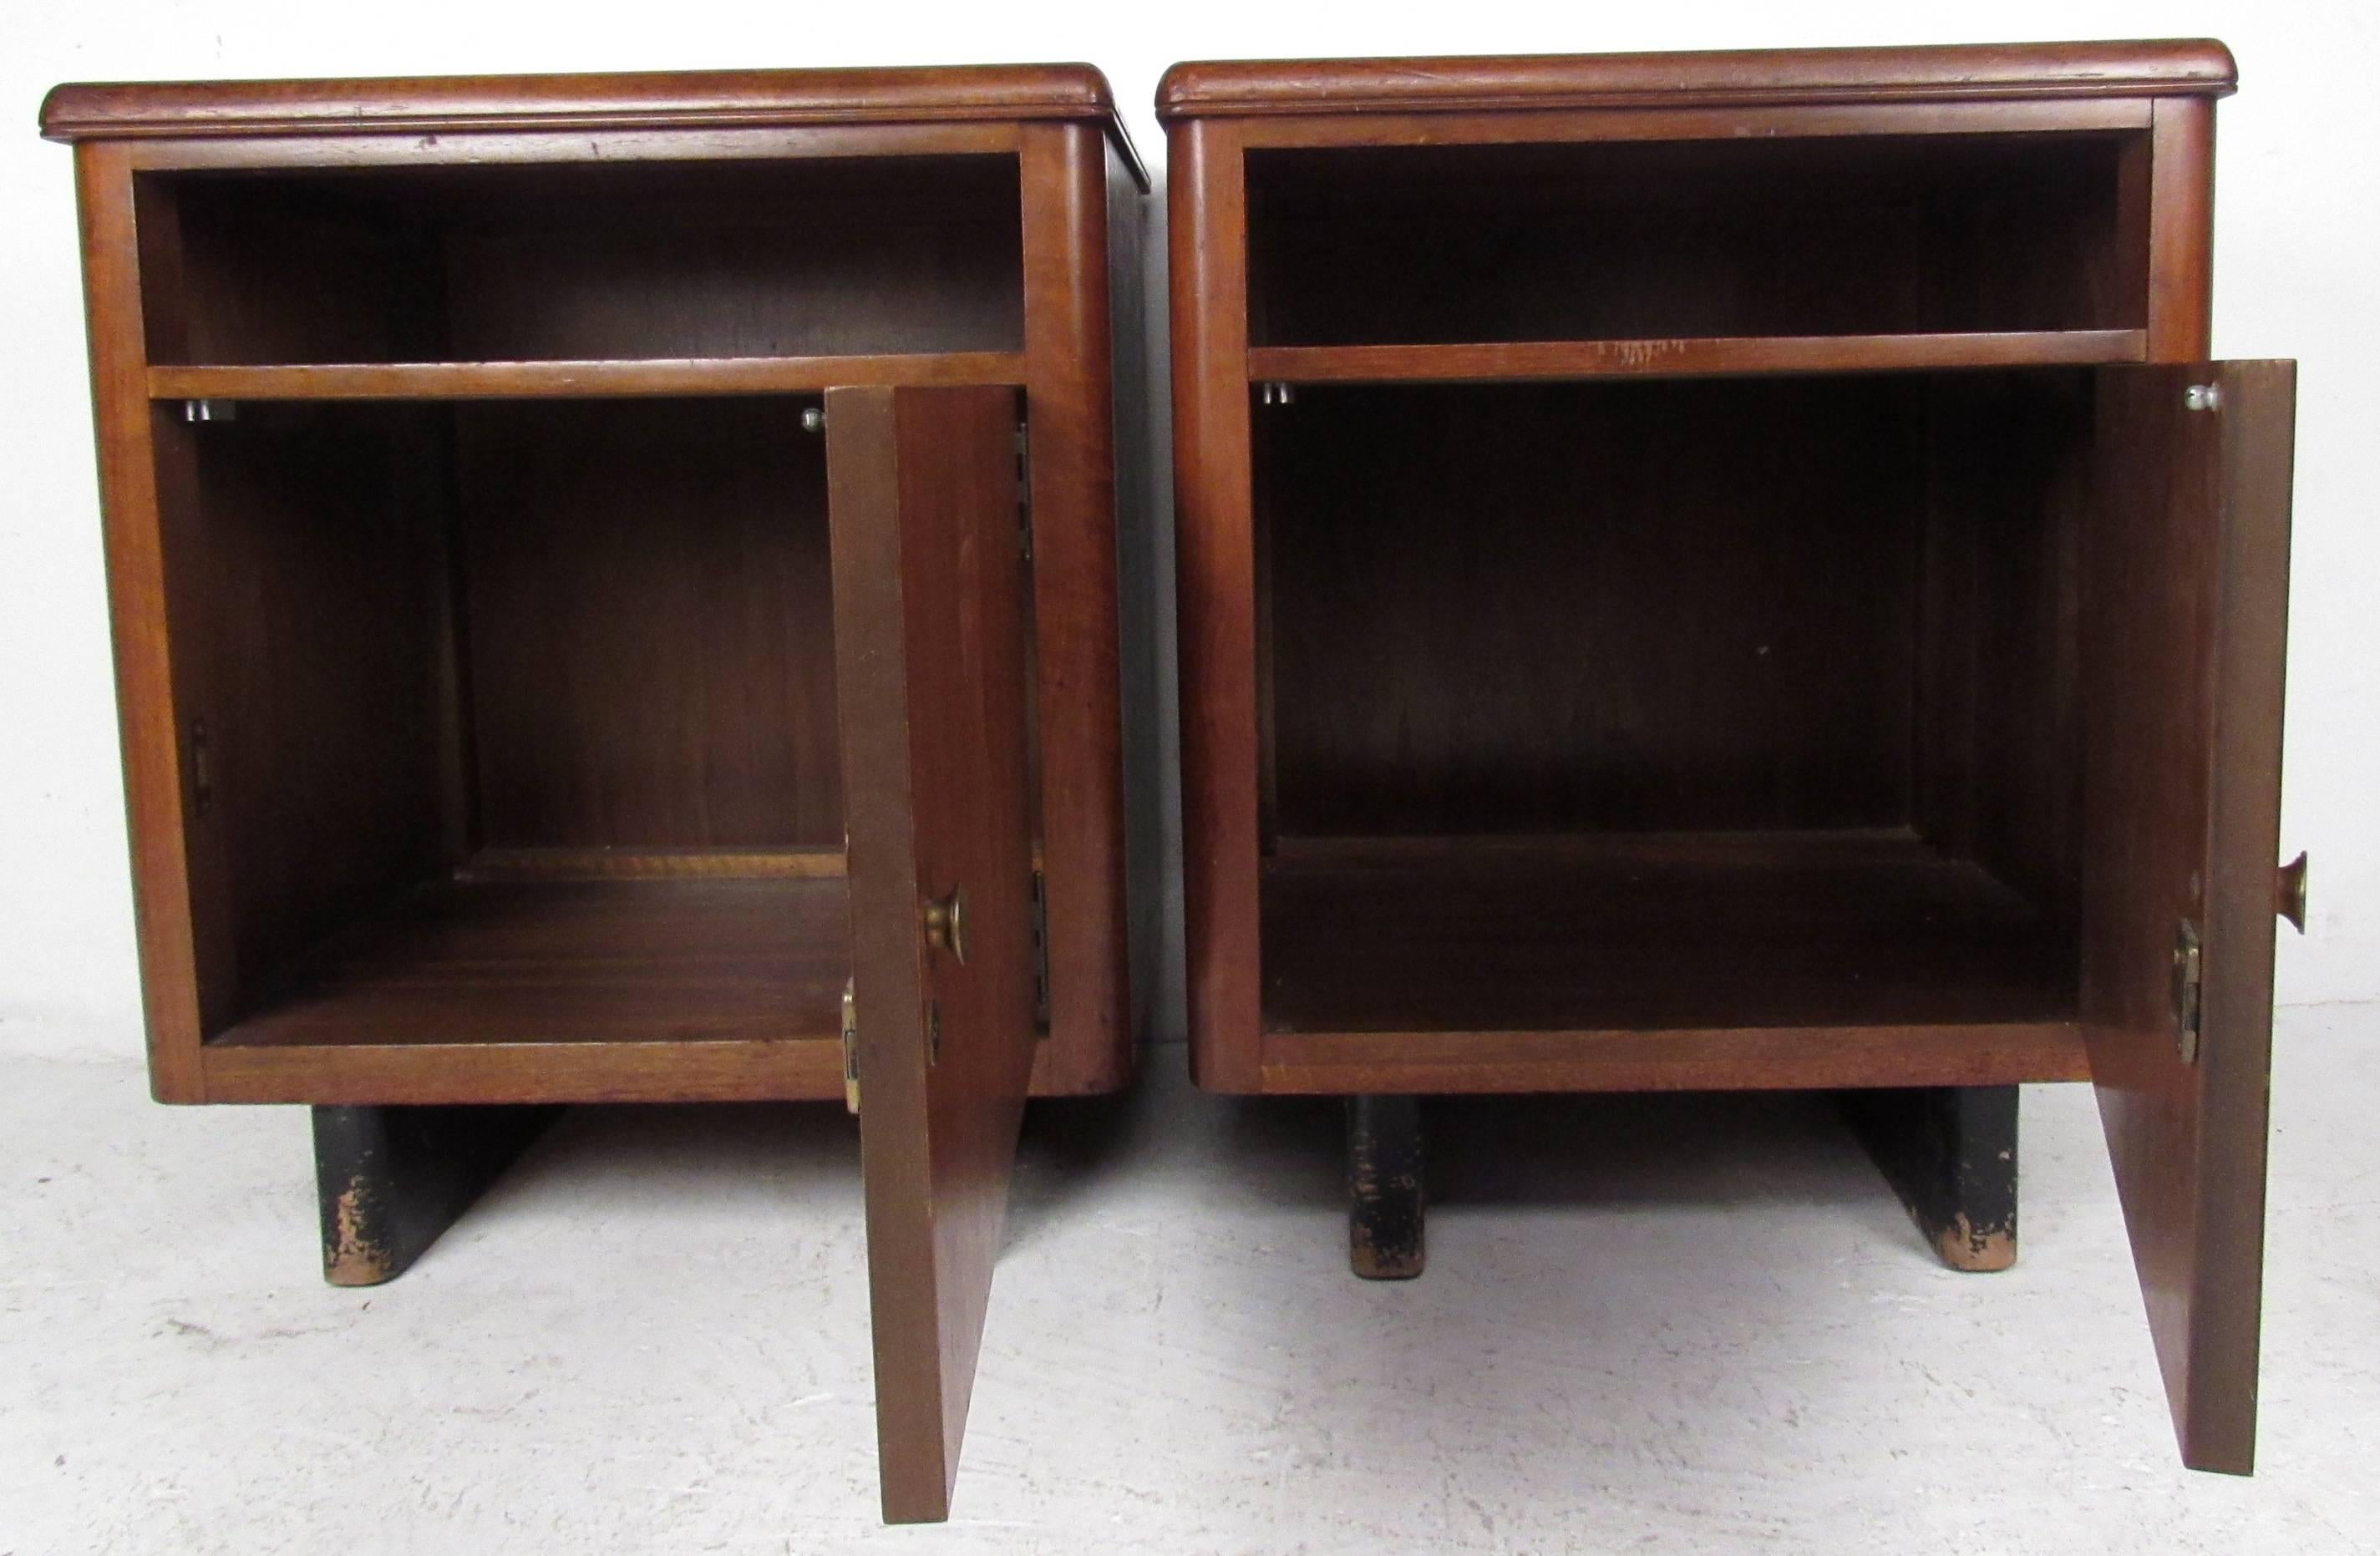 This unique pair of vintage nightstands combine open spacious storage with mid-century style. Perfect height for bedside tables, the combination of open shelf and cabinet space make these a versatile addition to any setting. Stylish sled legs and